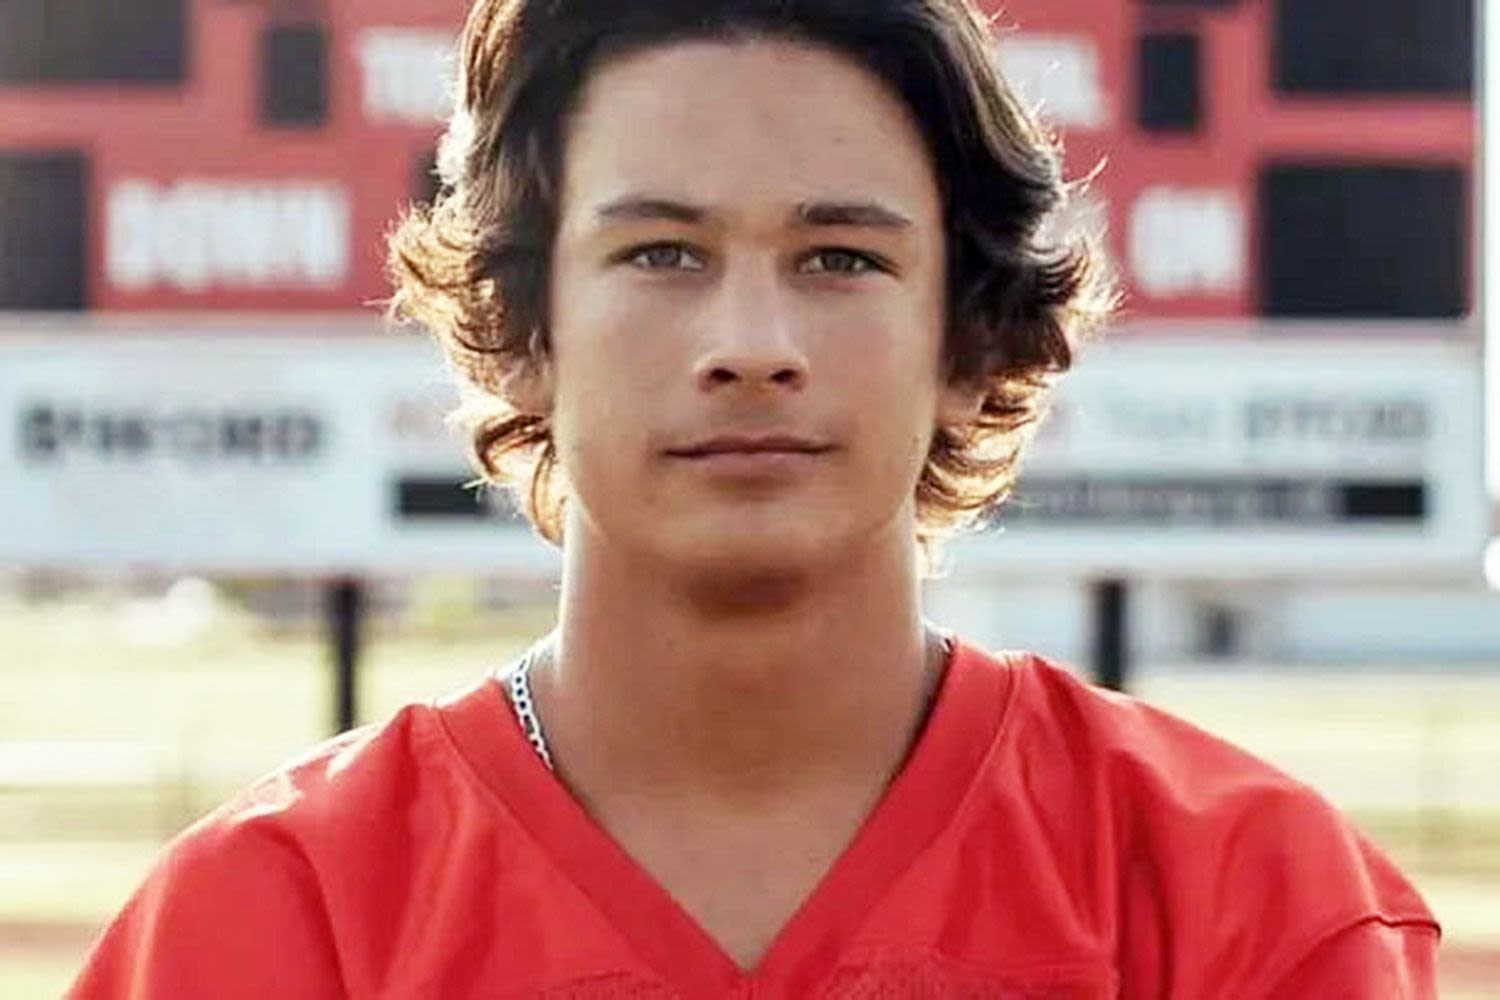 Cause of Death Revealed for Noah Presgrove, Okla. Teen Found Dead on Highway Wearing Only Shoes